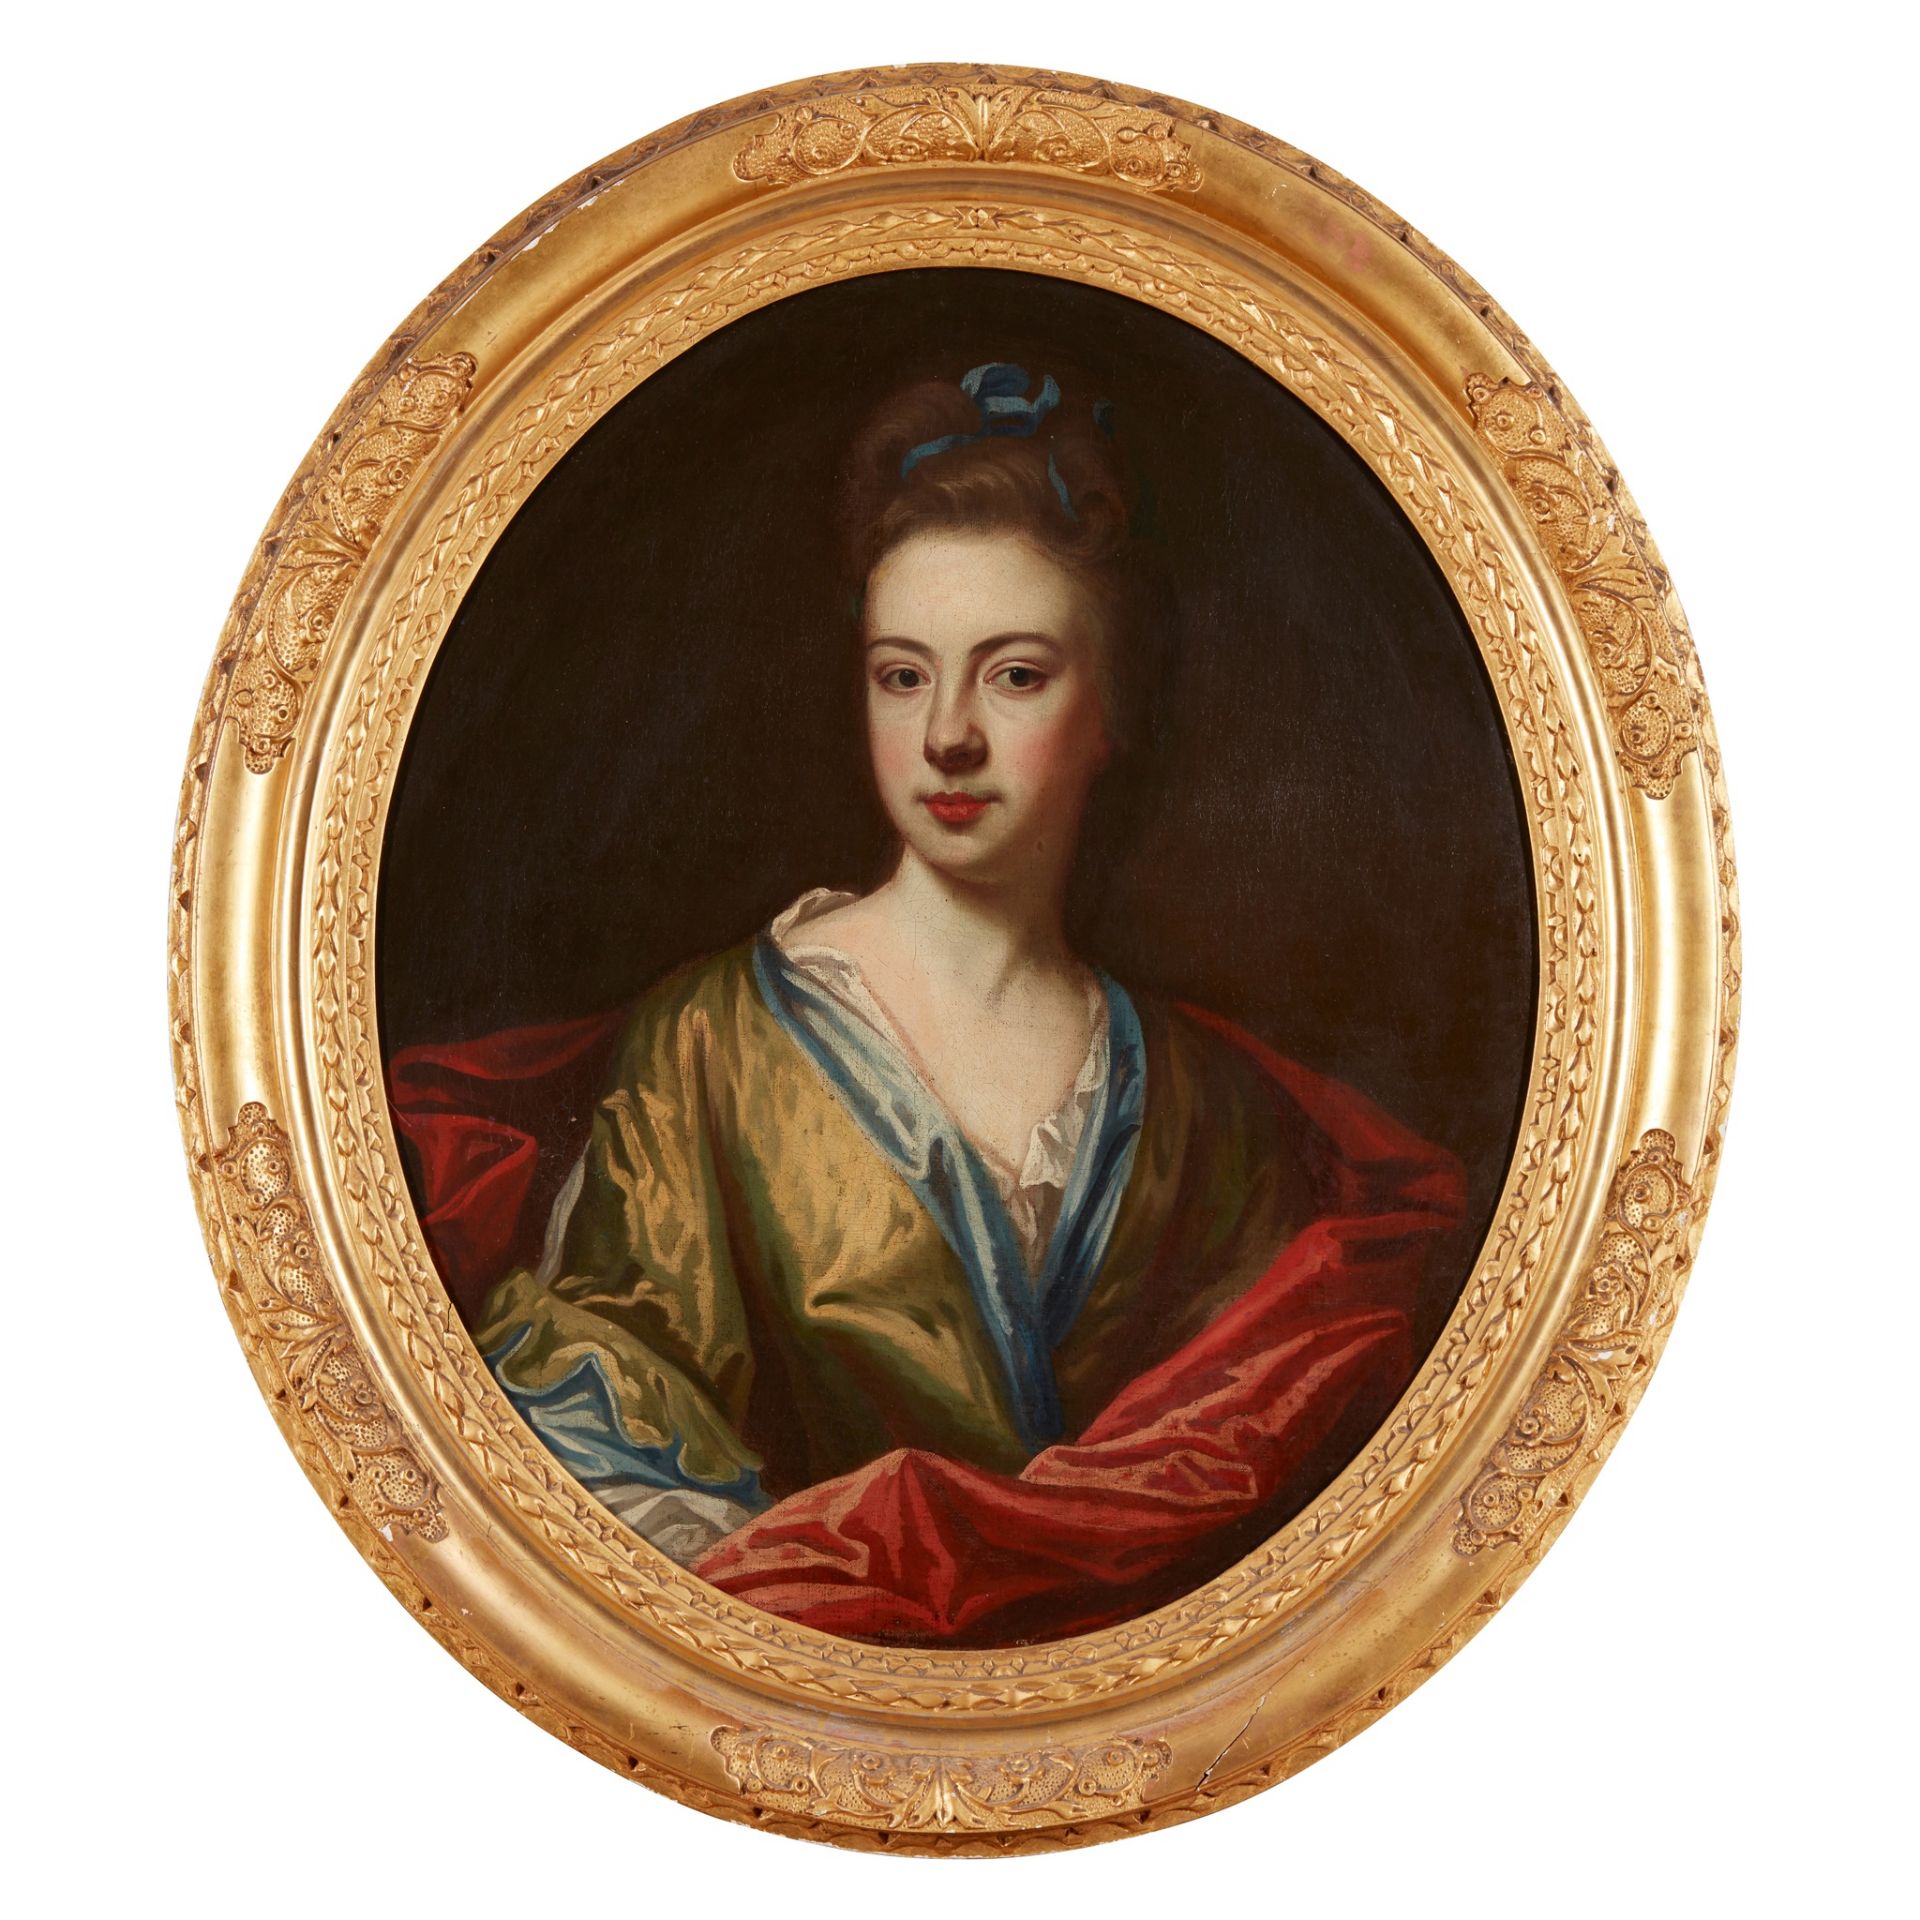 17TH CENTURY ENGLISH SCHOOL HALF LENGTH PORTRAIT OF A WOMAN IN CHARTREUSE DRESS WITH RED WRAP - Image 2 of 2